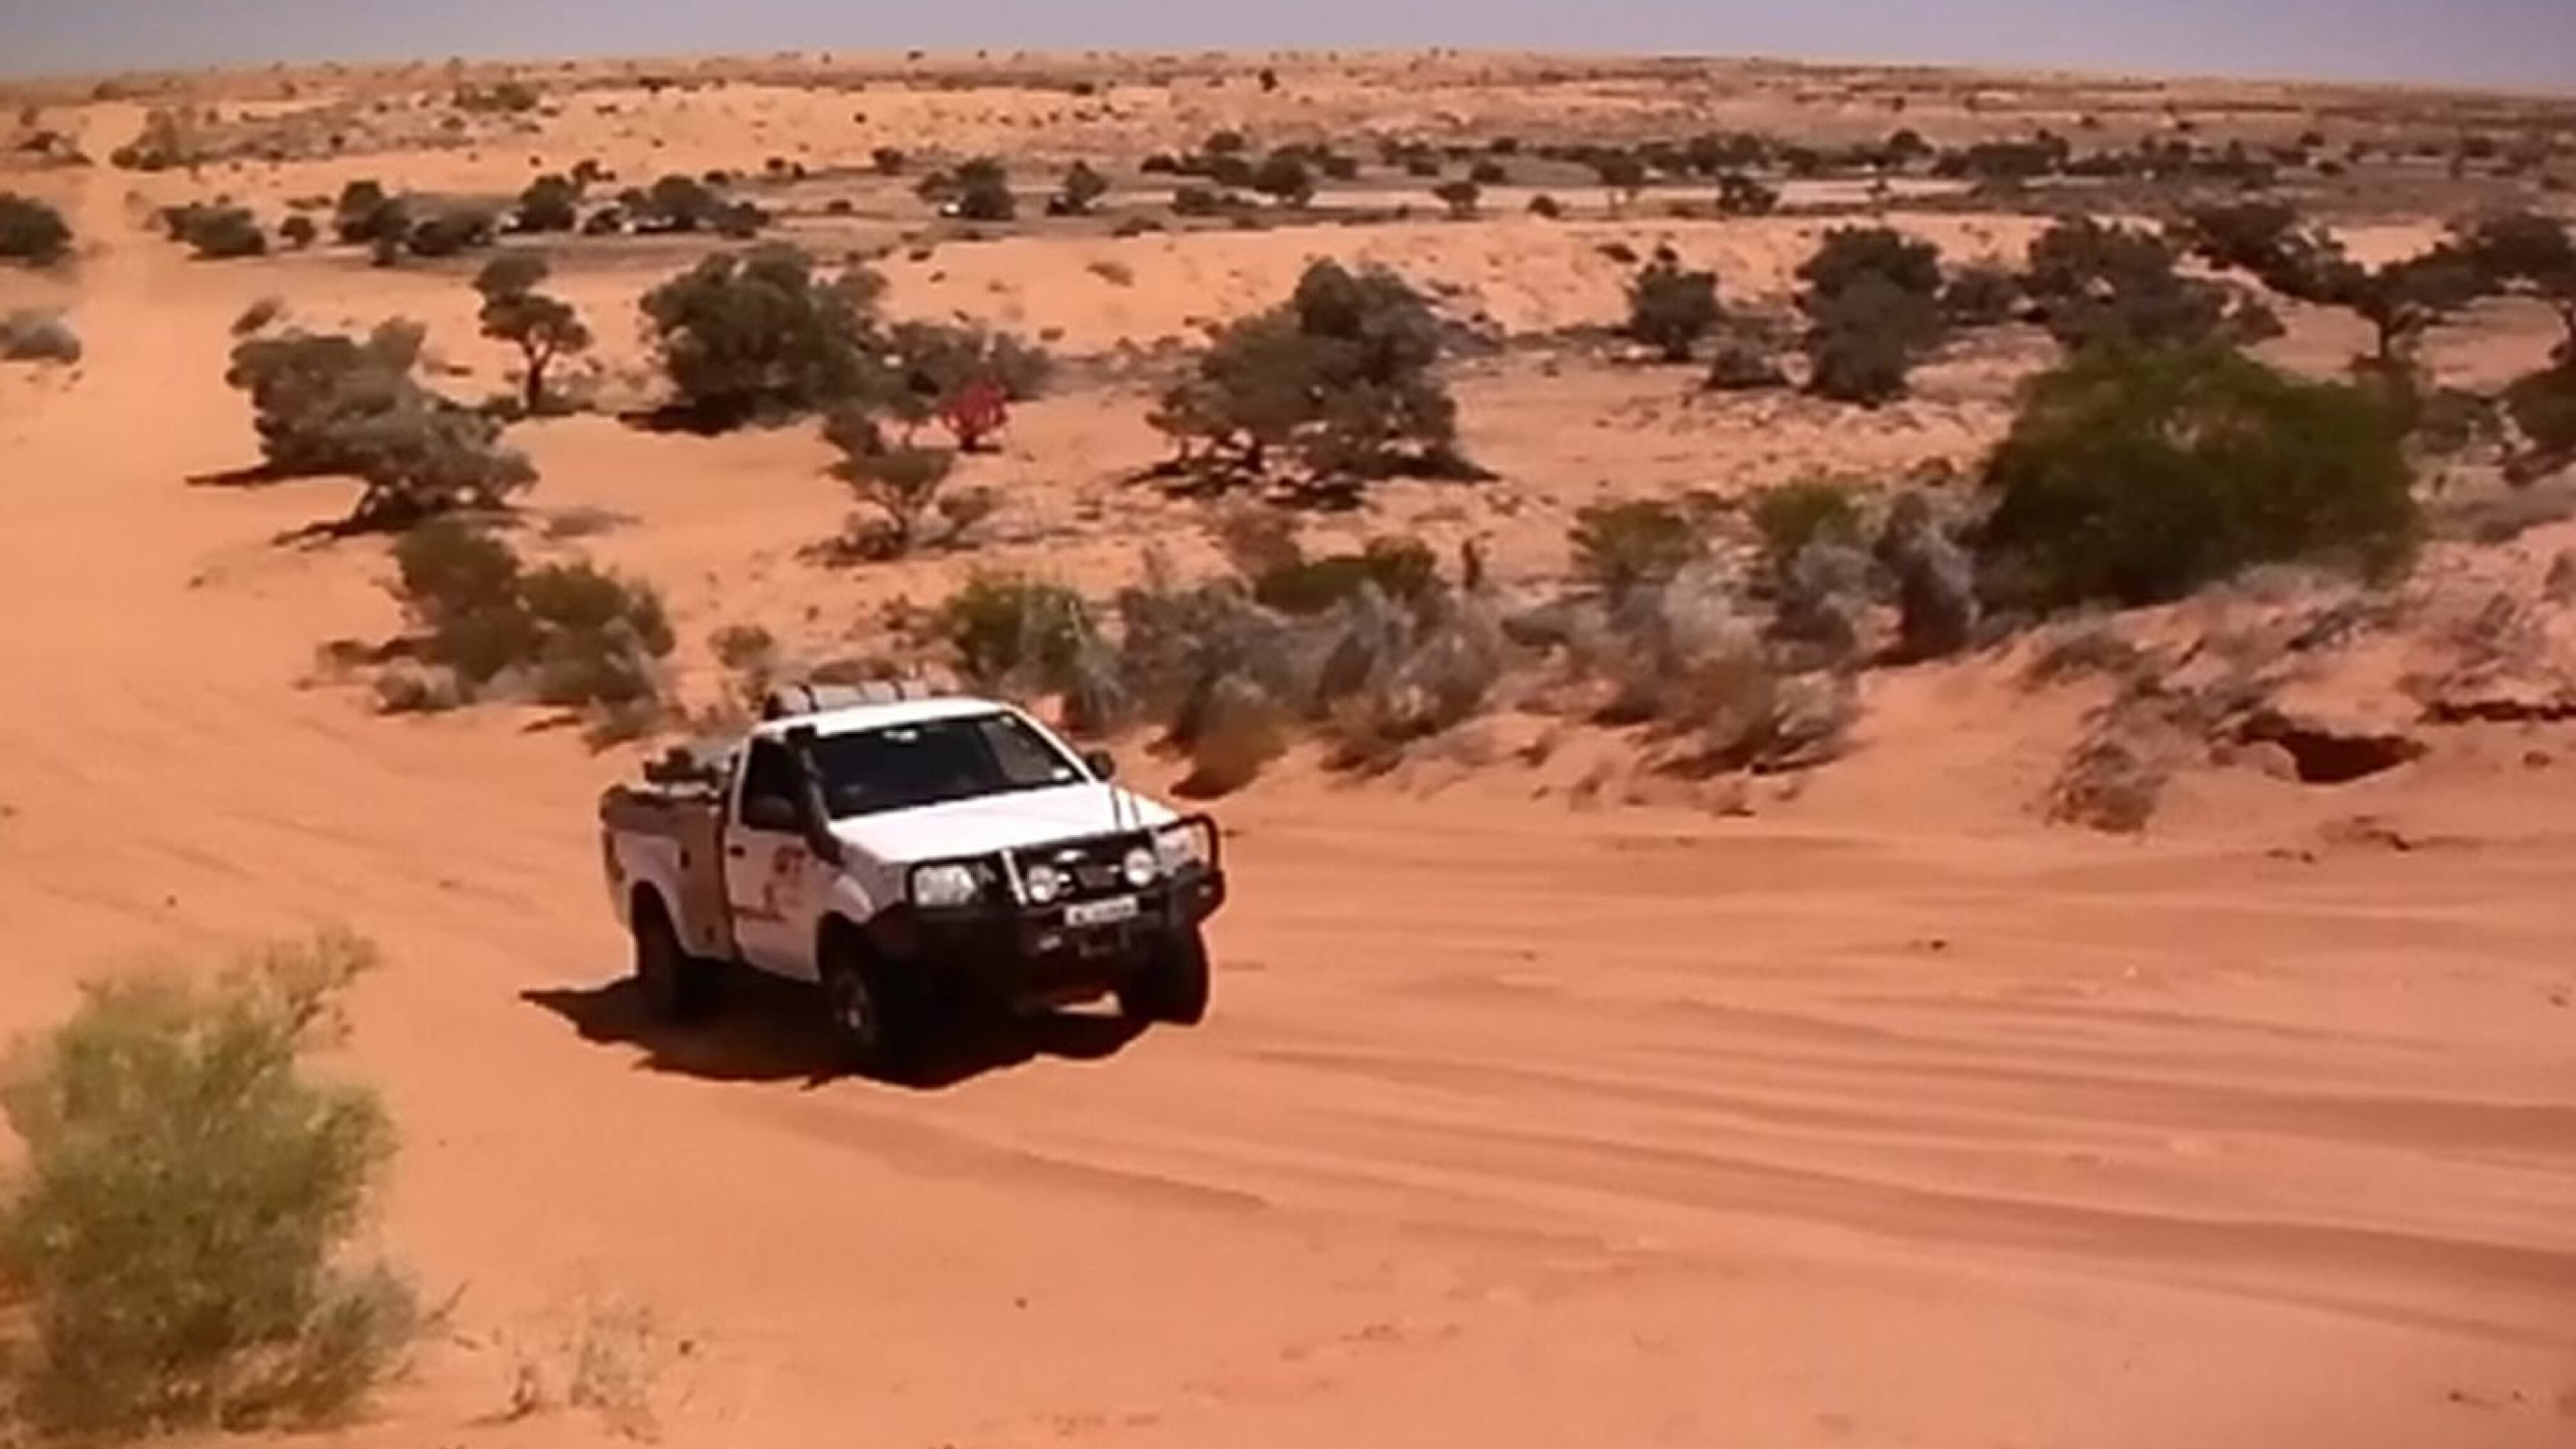 4x4 tips: Sand driving - Drive